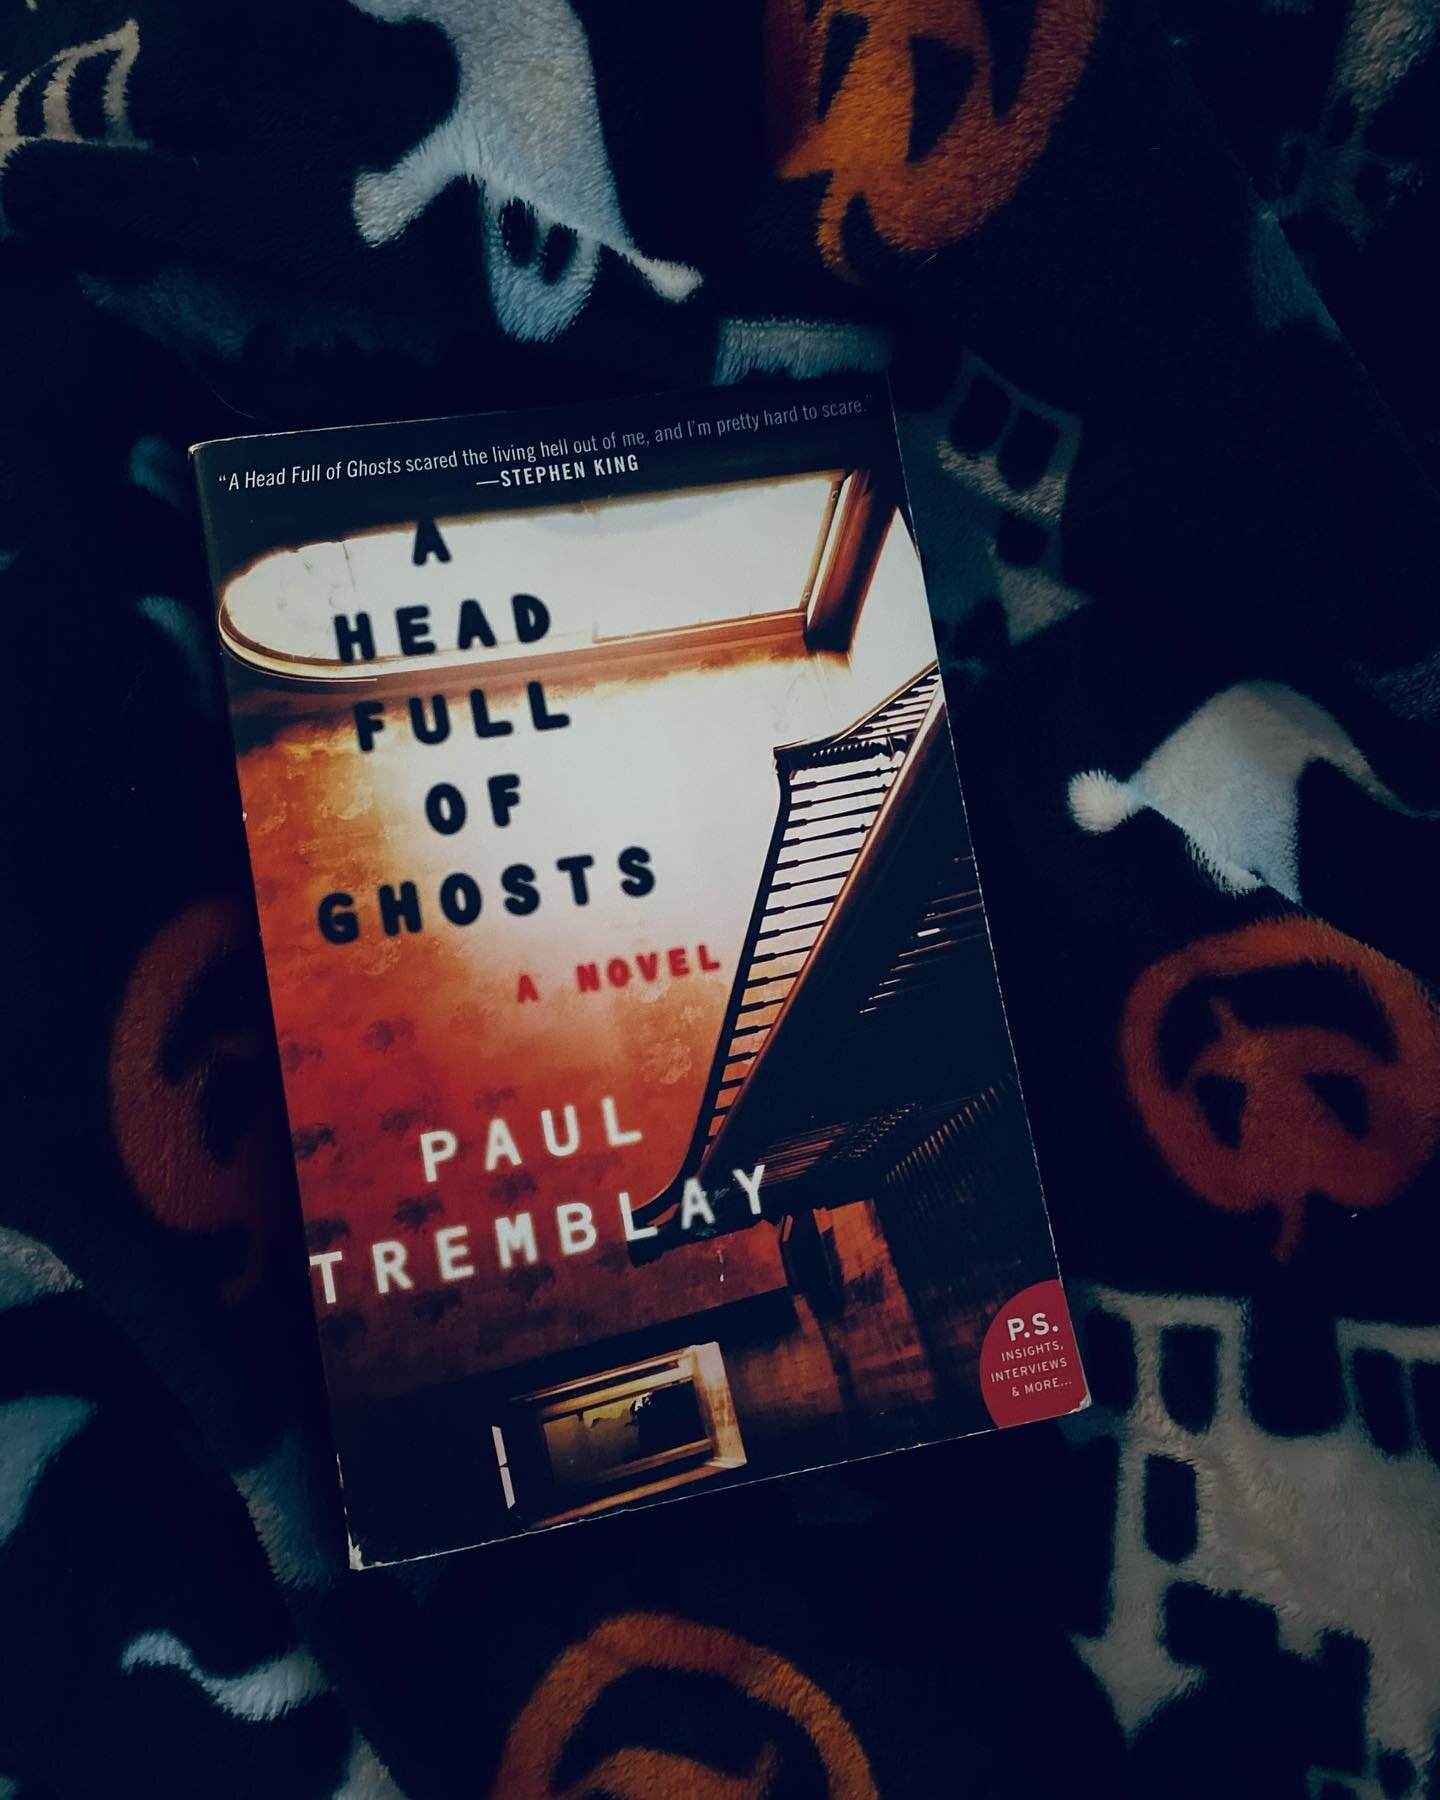 📖 Okay, what's everybody&rsquo;s fall reads they've got lined up? 📖

I think I'm finally ready to crack open &ldquo;A Head Full of Ghosts&rdquo; that has been on my TBR pile for a minute. 

A while back (like two years ago), I had posted a question